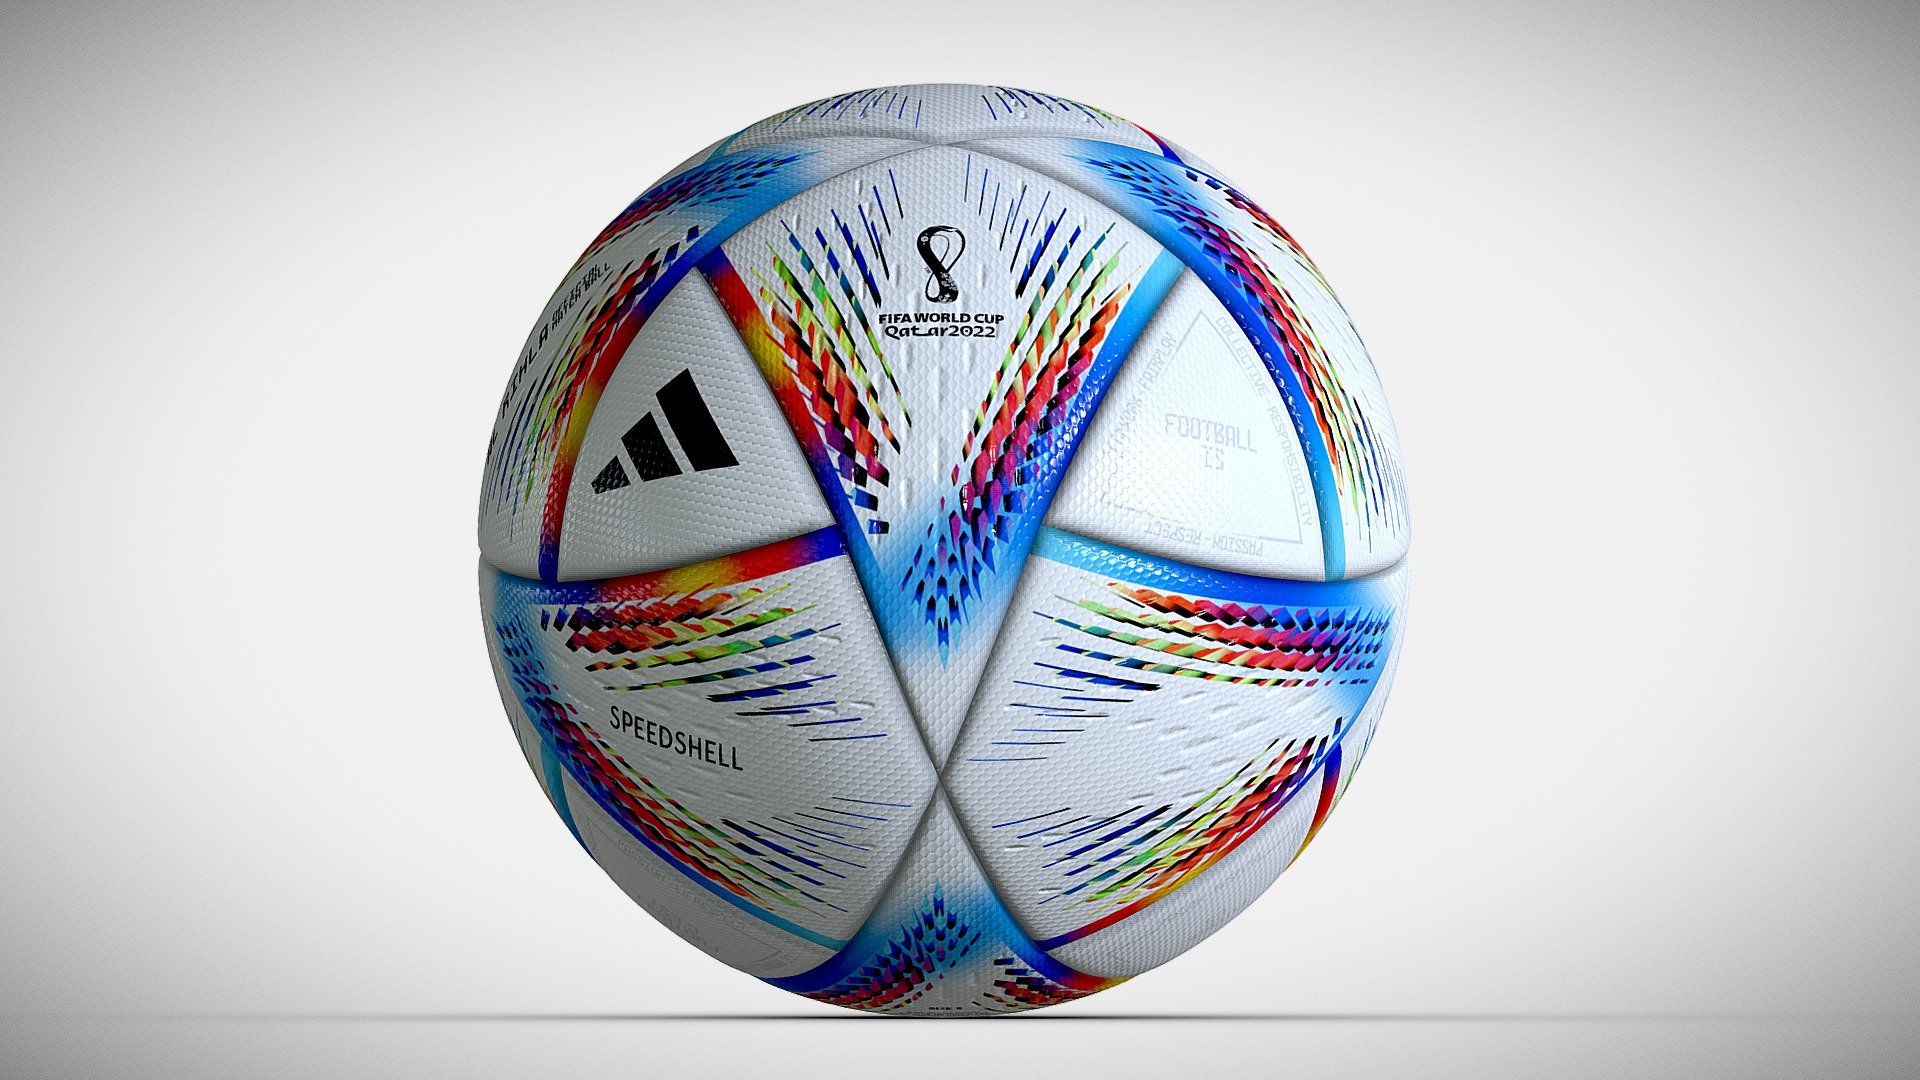 Al Rihla Official Ball Qatar 2022 with PBR Textures with a resolution of 4096x4096, these textures are: Basecolor, Metallic, Roughness and Normal

The model is midpoly so it can be used for both film/advertisement with closed up renders and also for realtime projects like games so the geometry has 11k polys

The model has the pivot in its center so it can be rotated naturaly like a ball it is also placed in the world center with a real life measures

The geometry of this model has 11100 poligons - Al Rihla Official Ball Qatar 2022 - Buy Royalty Free 3D model by rfarencibia 3d model